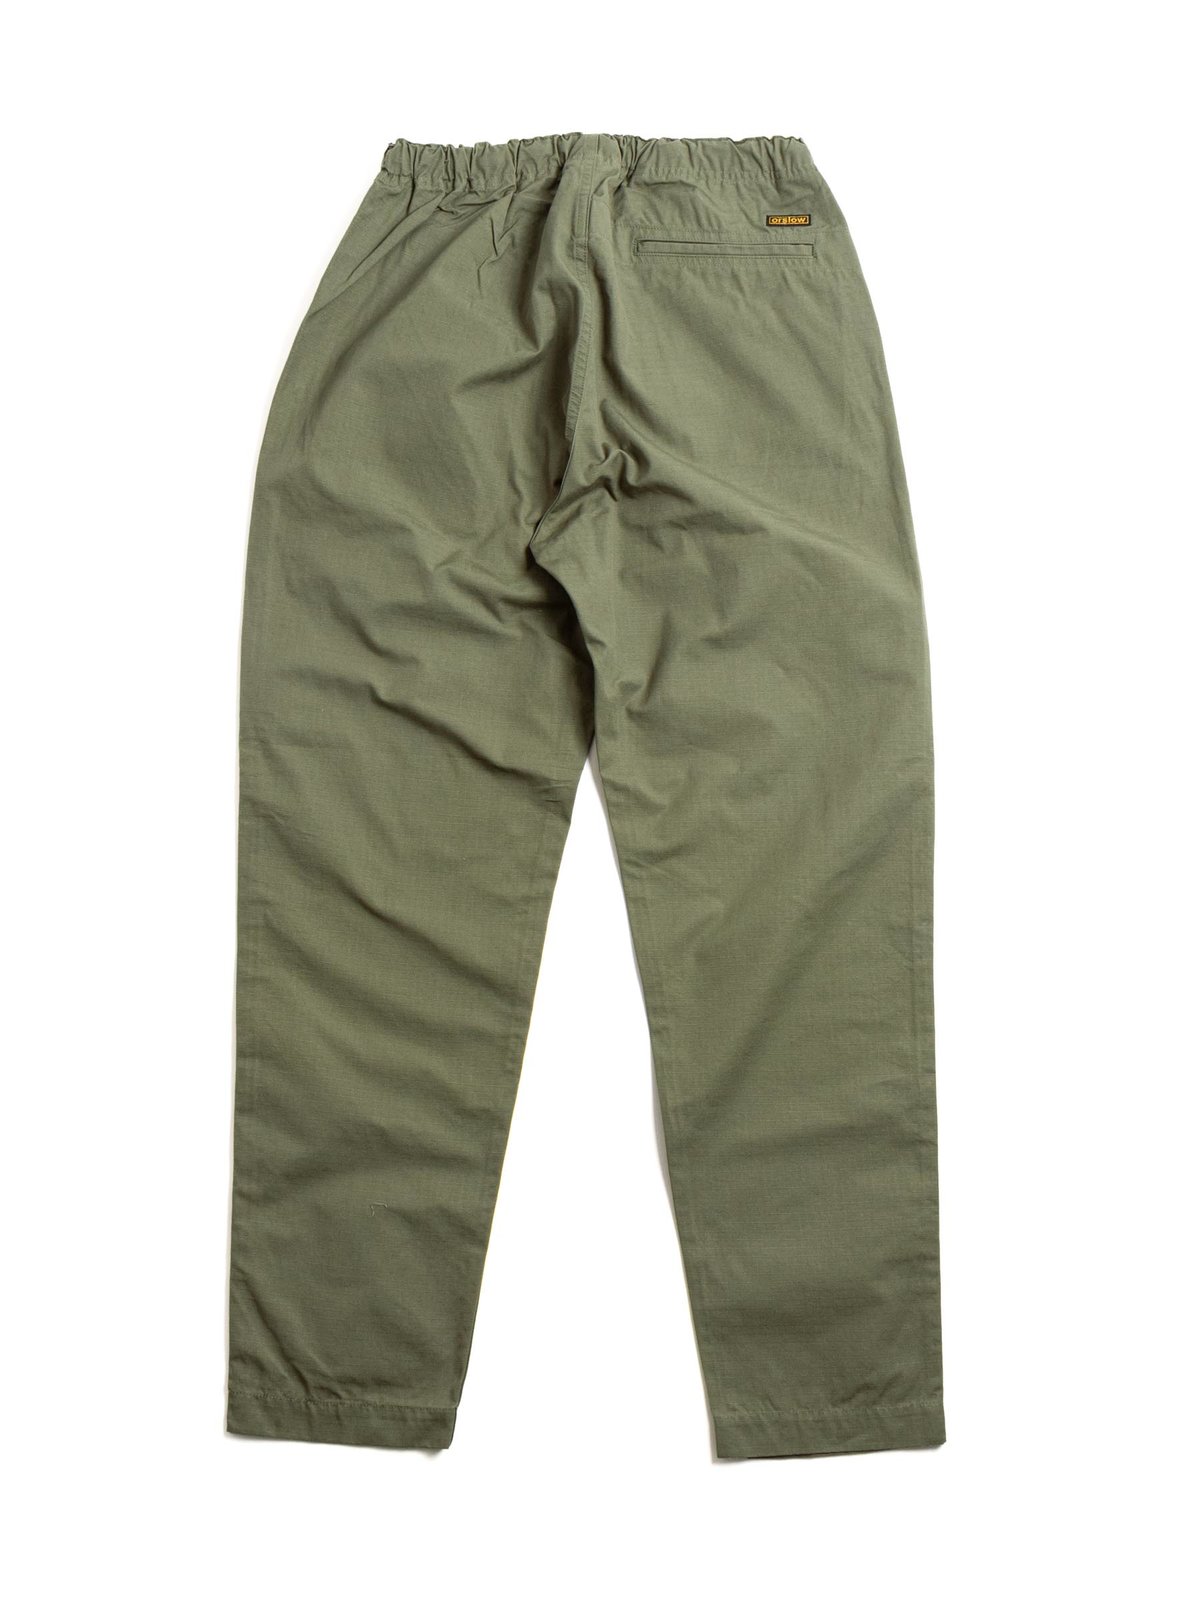 NEW YORKER PANT ARMY RIPSTOP - Image 6